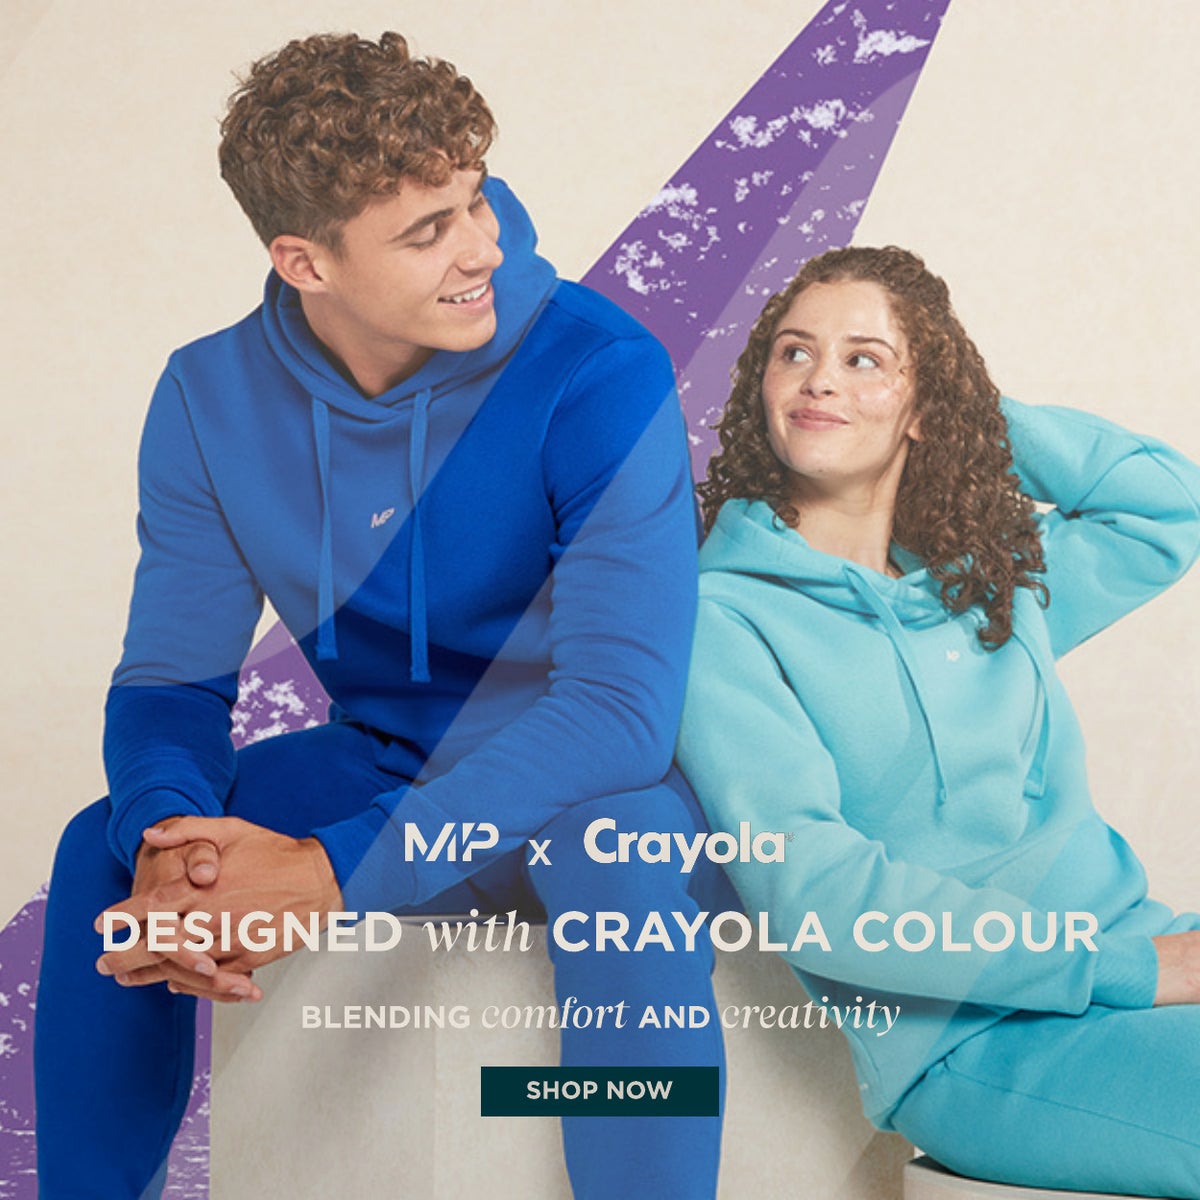 MP x Crayola collaboration for bright and colourful activewear.